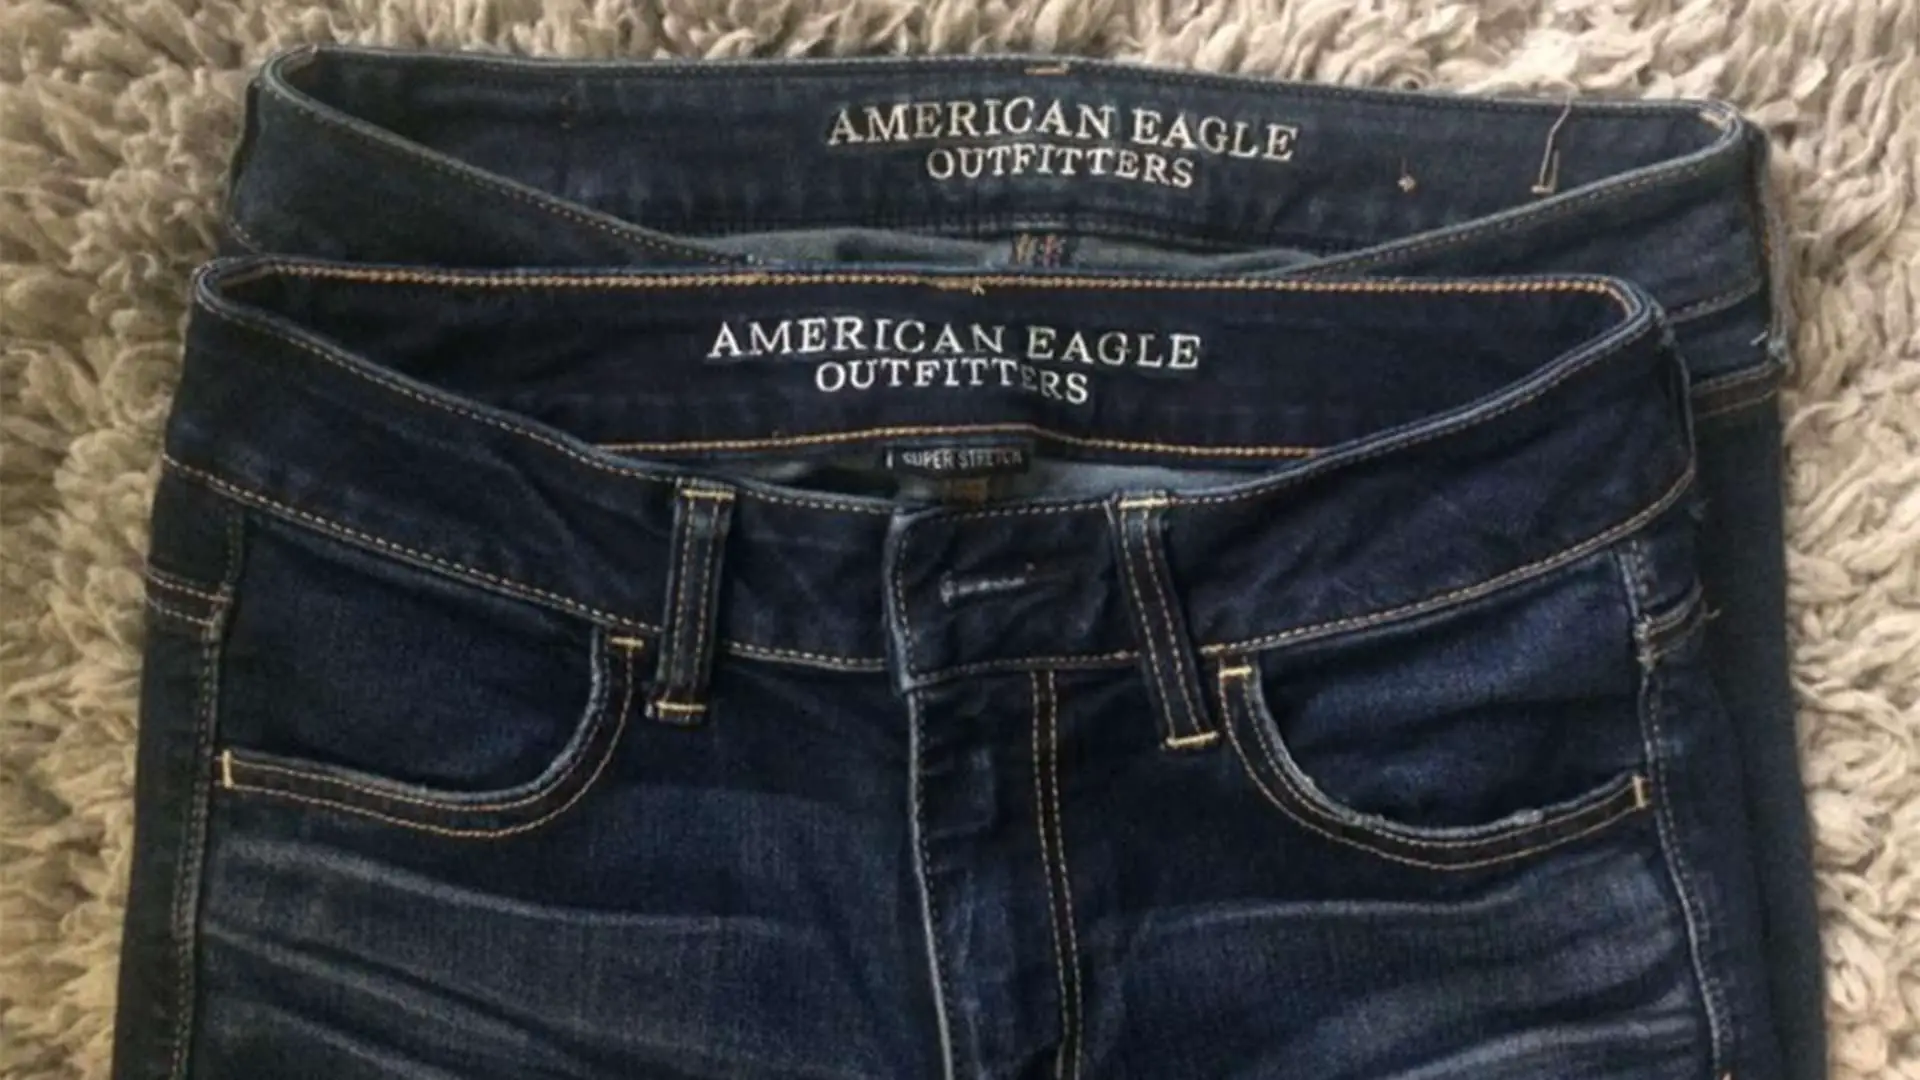 History of American Eagle Jeans